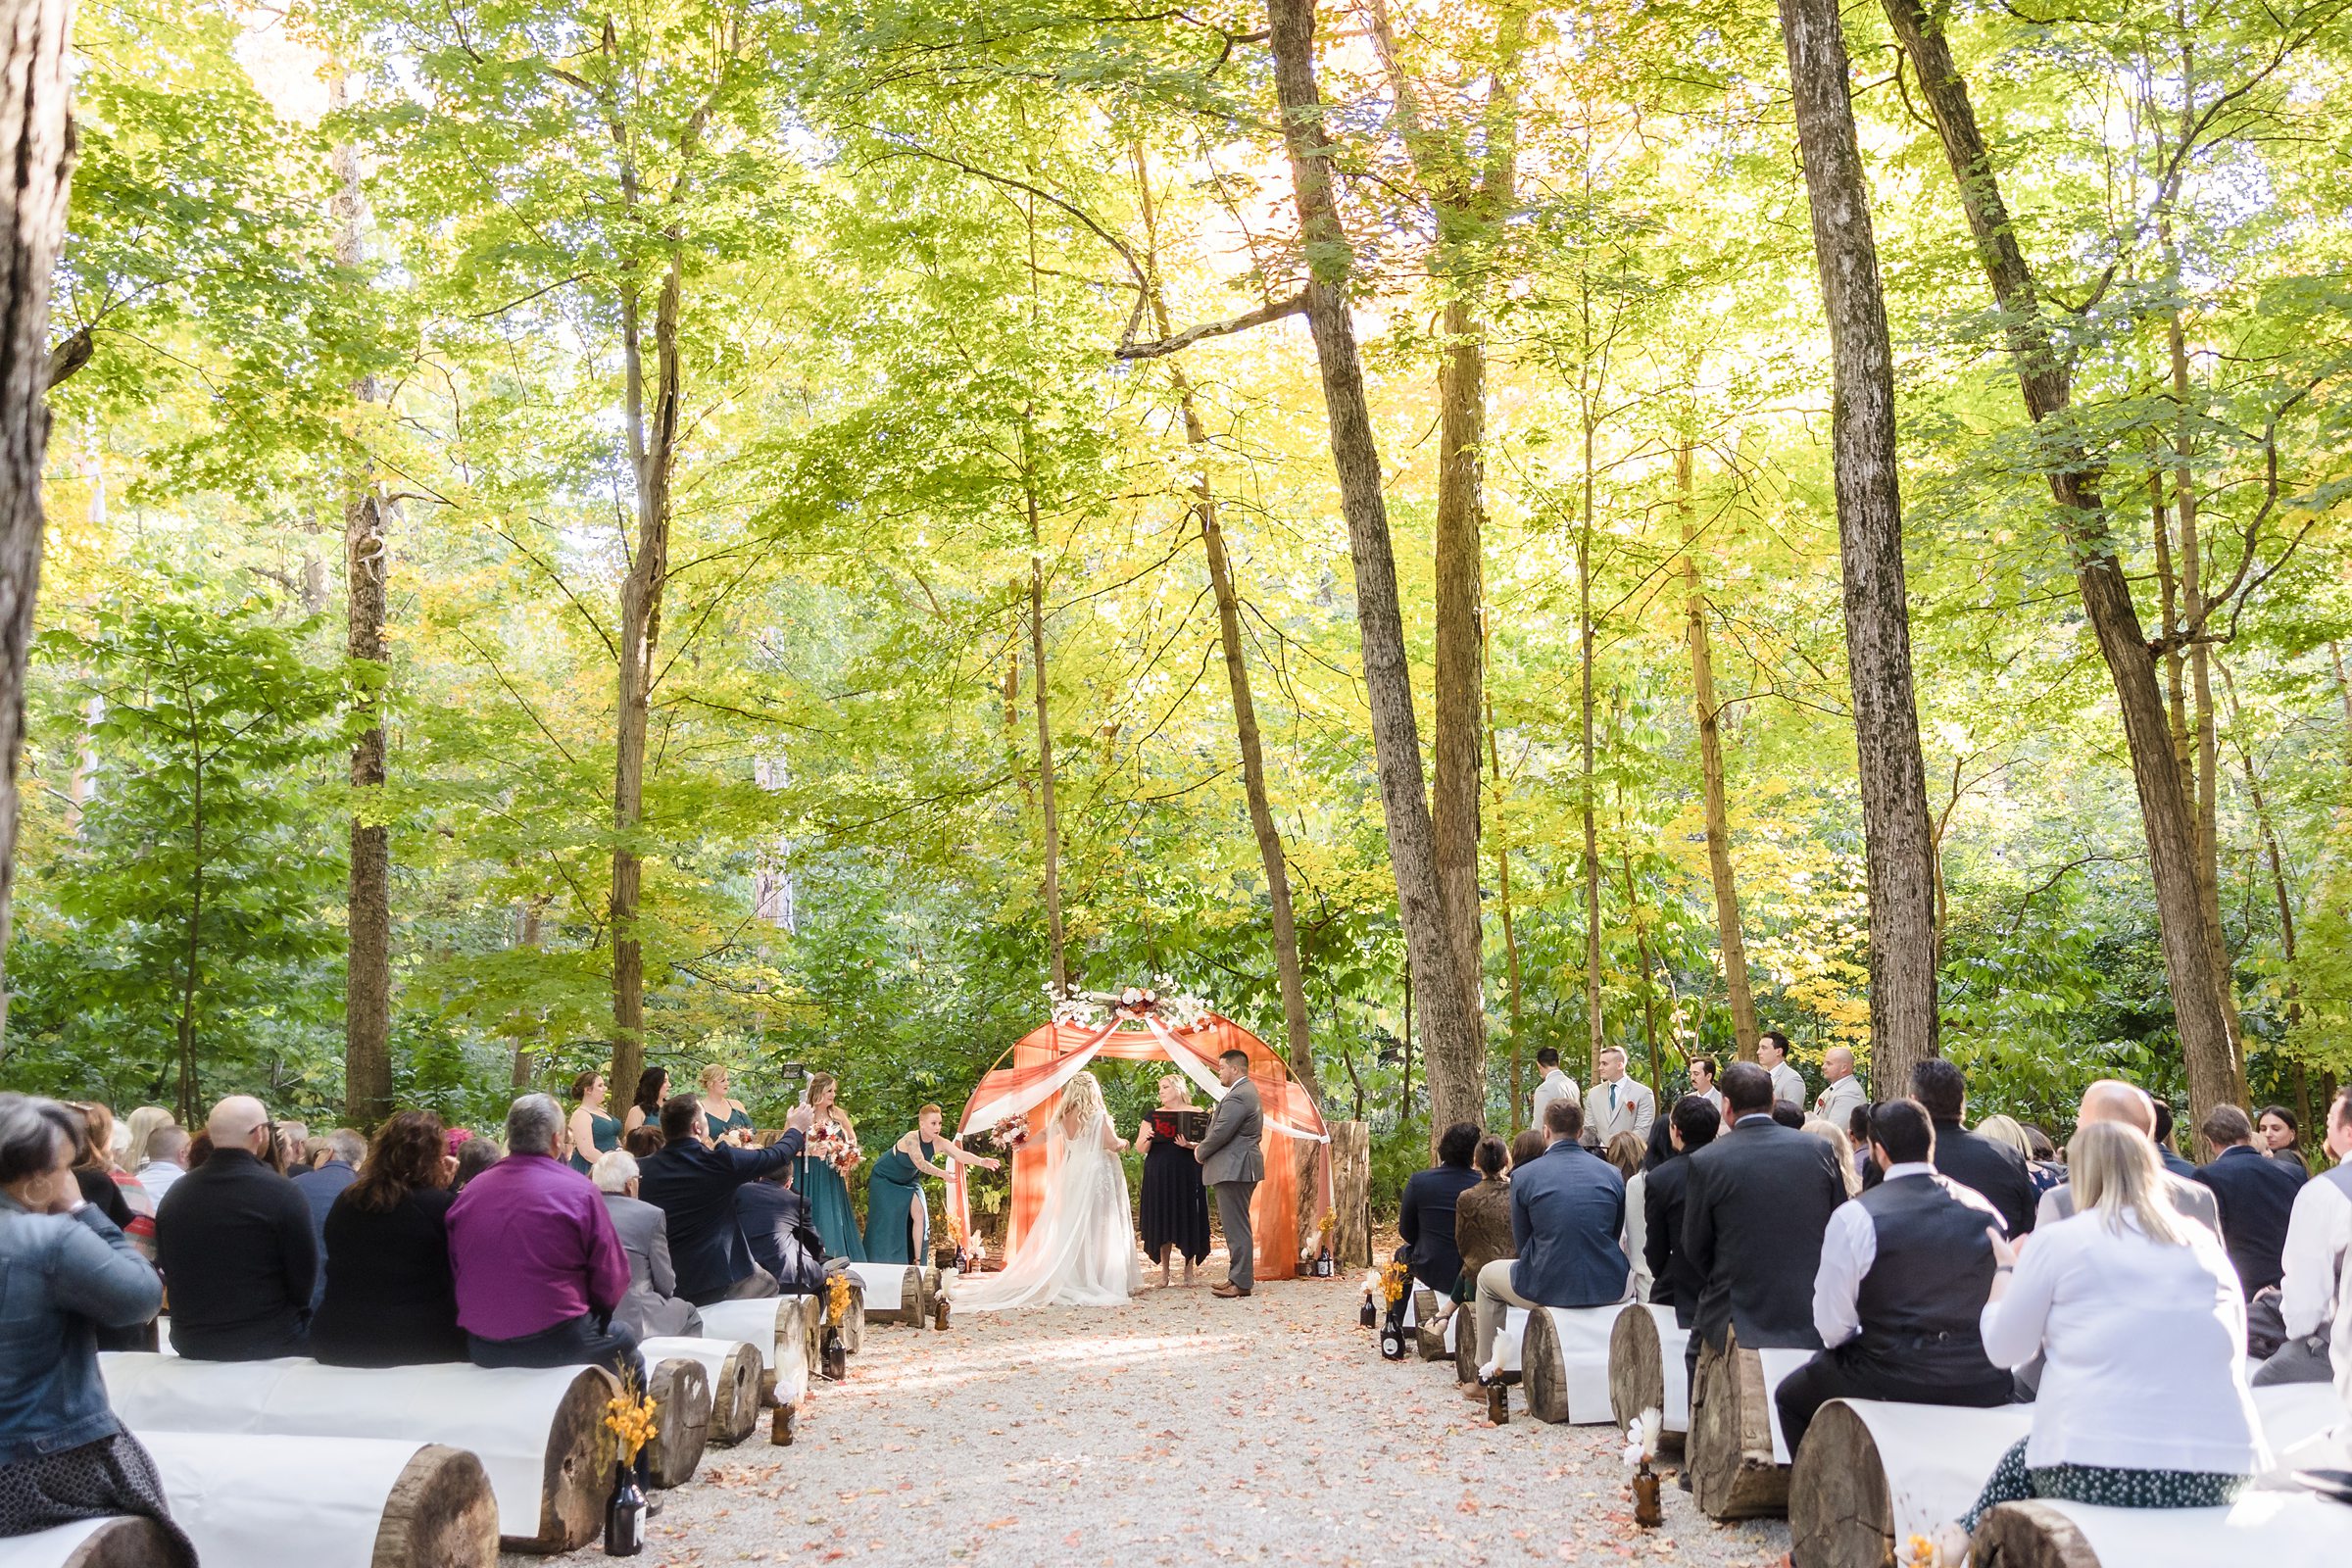 Wedding ceremony at Funks Grove in Mclean, Illinois.